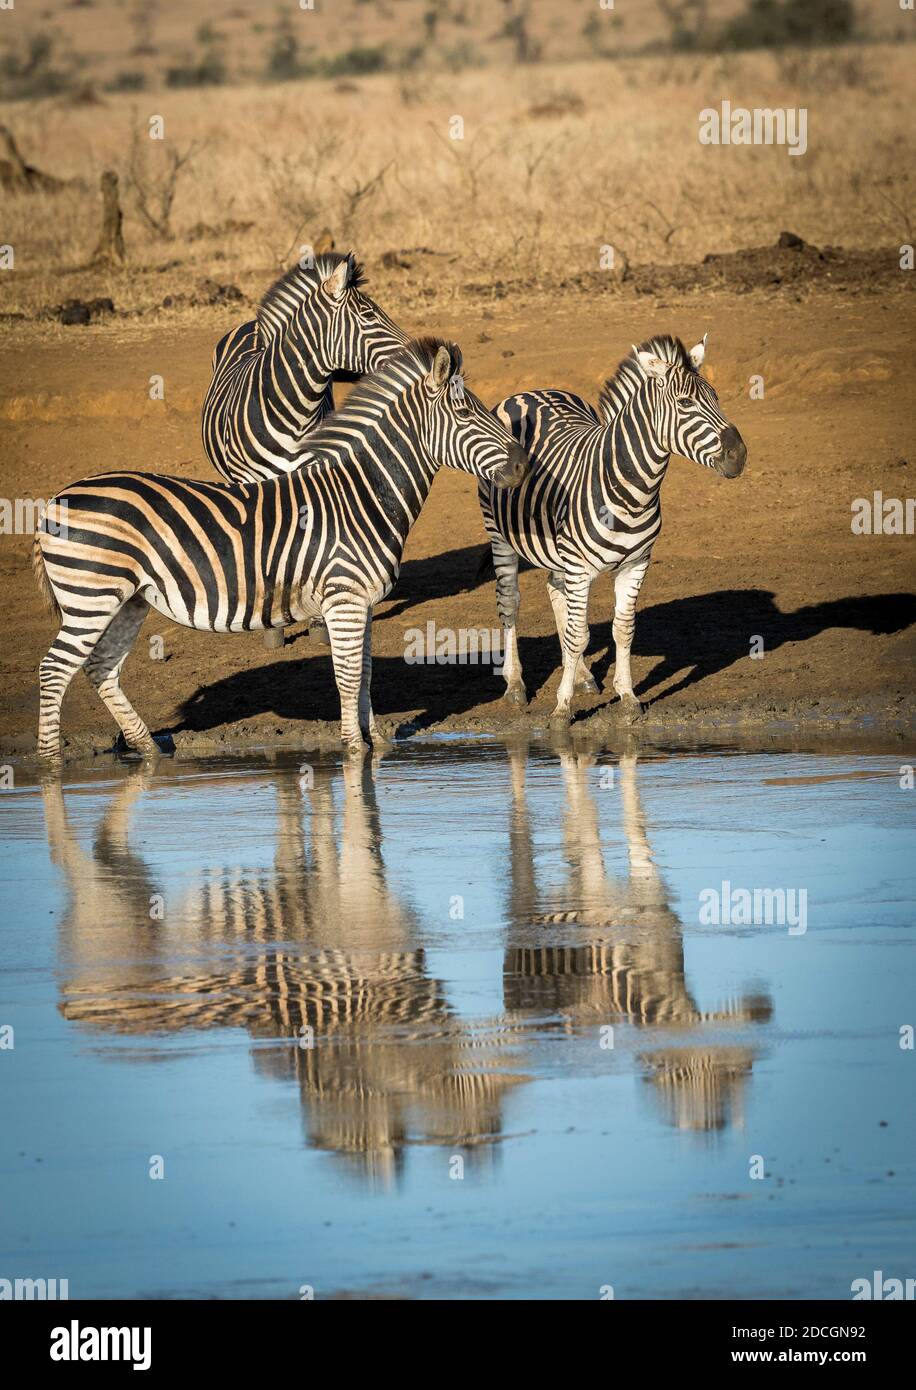 Three adult zebras standing at the edge of blue water looking alert in Kruger Park in South Africa Stock Photo